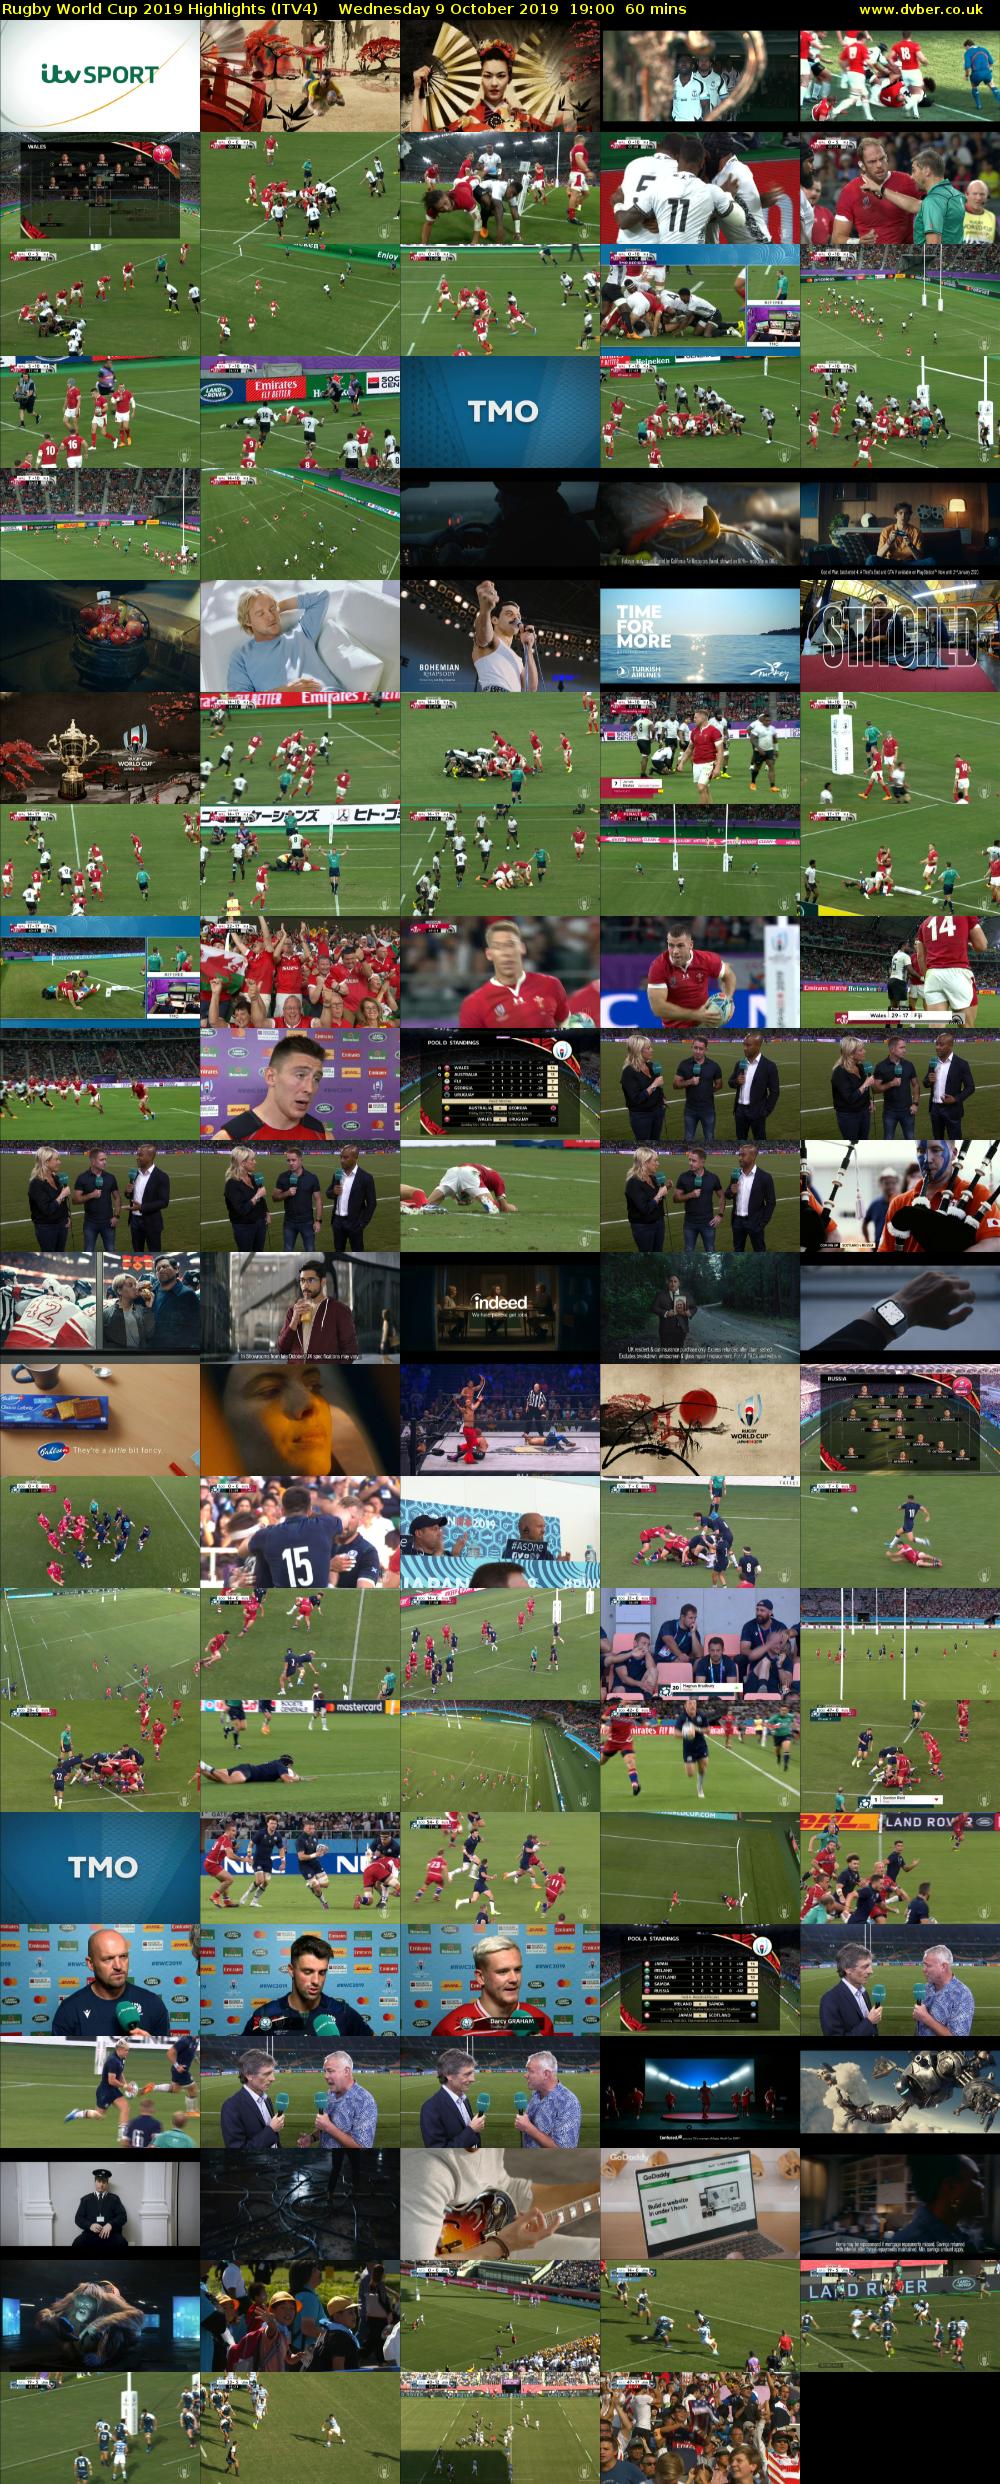 Rugby World Cup 2019 Highlights (ITV4) Wednesday 9 October 2019 19:00 - 20:00